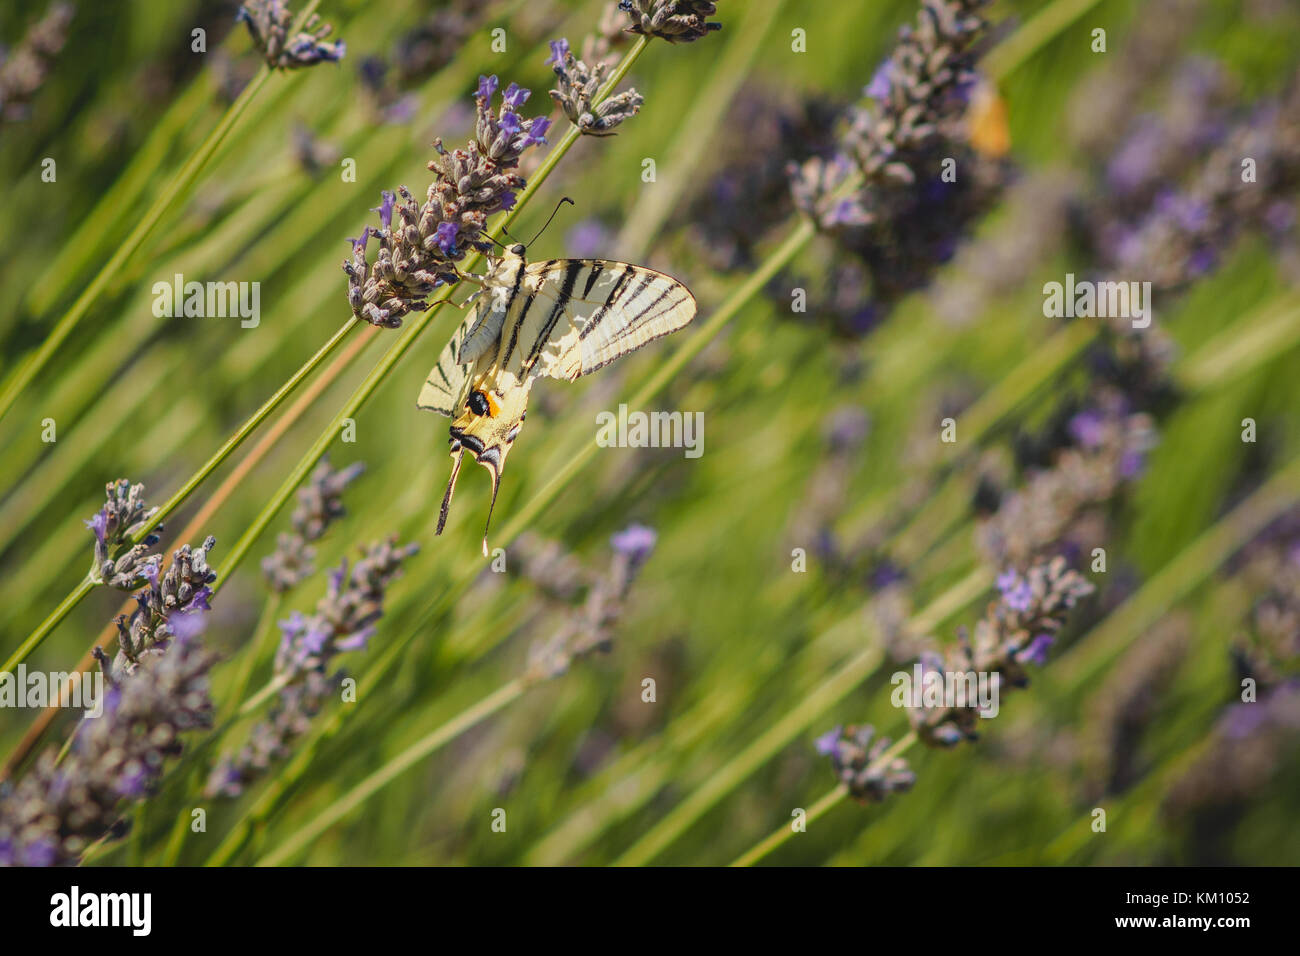 A common yellow swallowtail butterfly (Papilio Machaon) on a lavender flower. Stock Photo